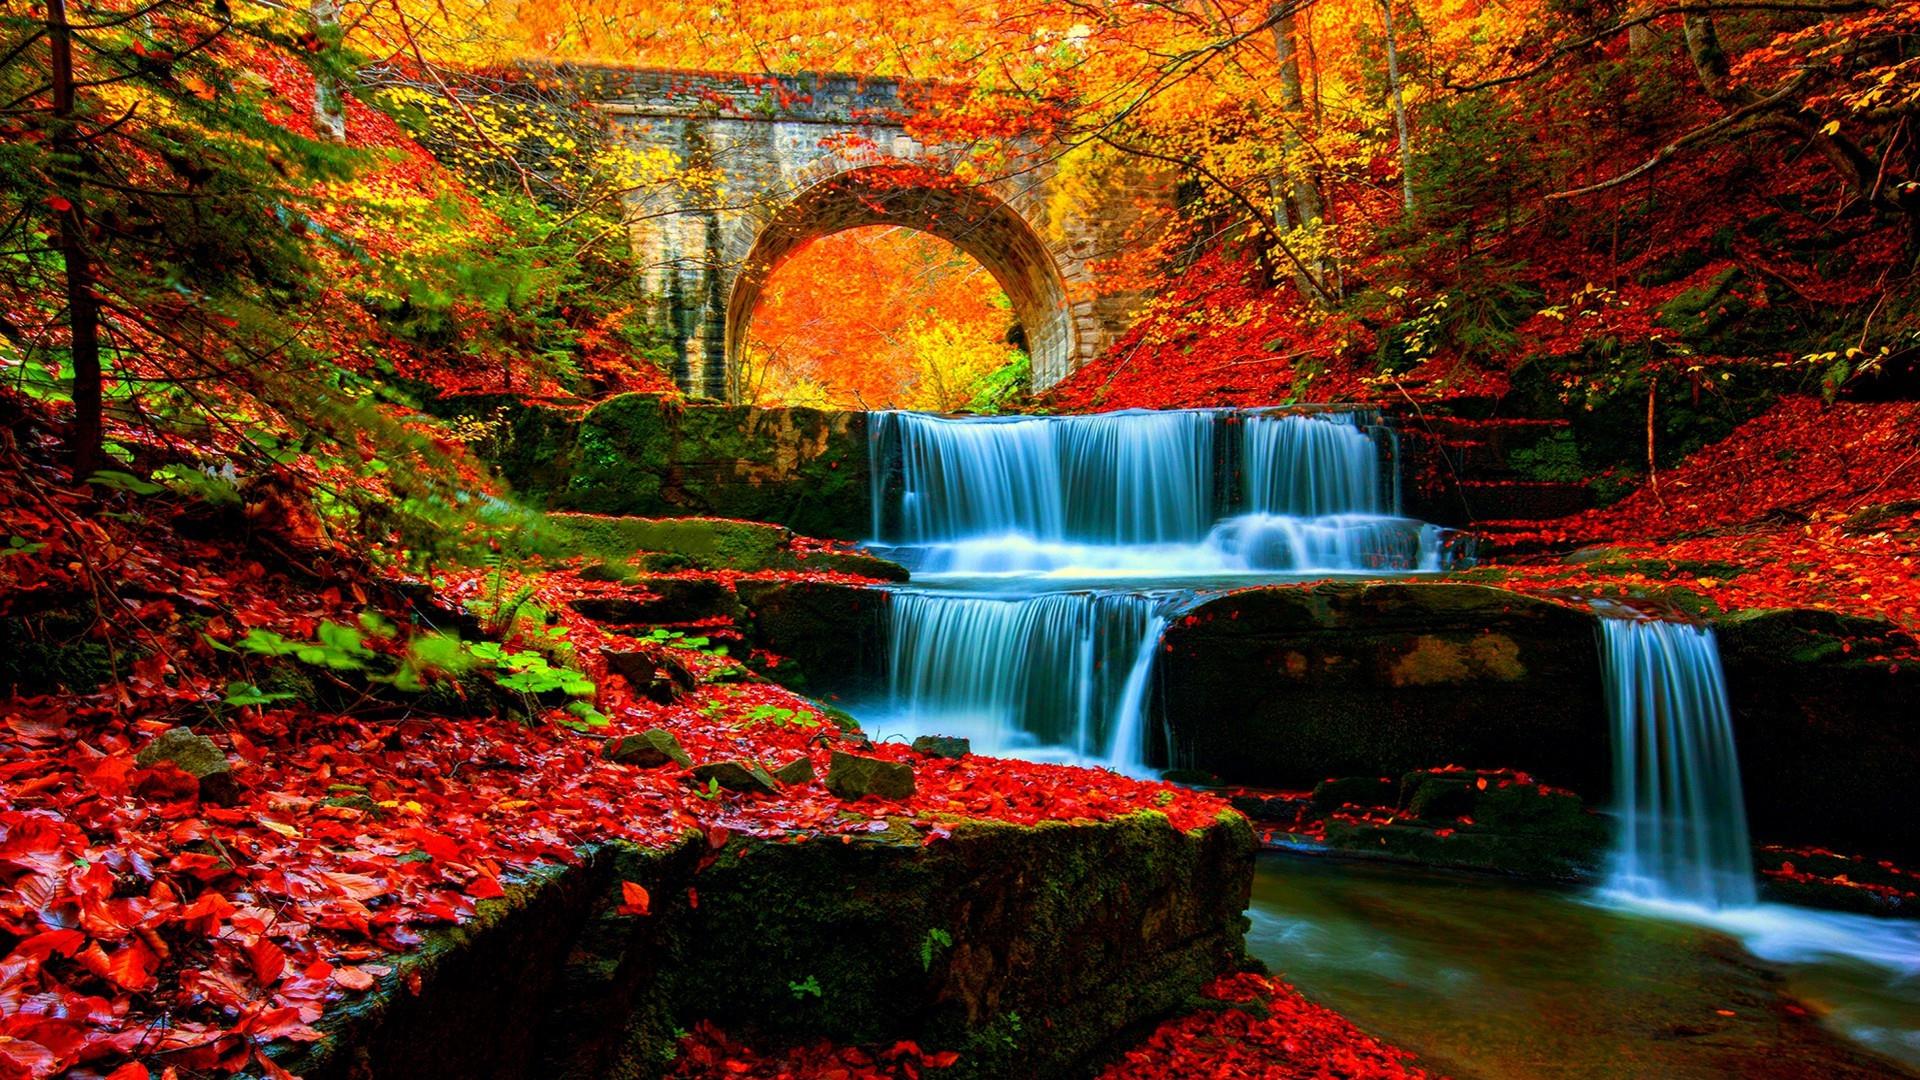 Autumn Waterfall In The Forest Wallpaper - Autumn Waterfall , HD Wallpaper & Backgrounds